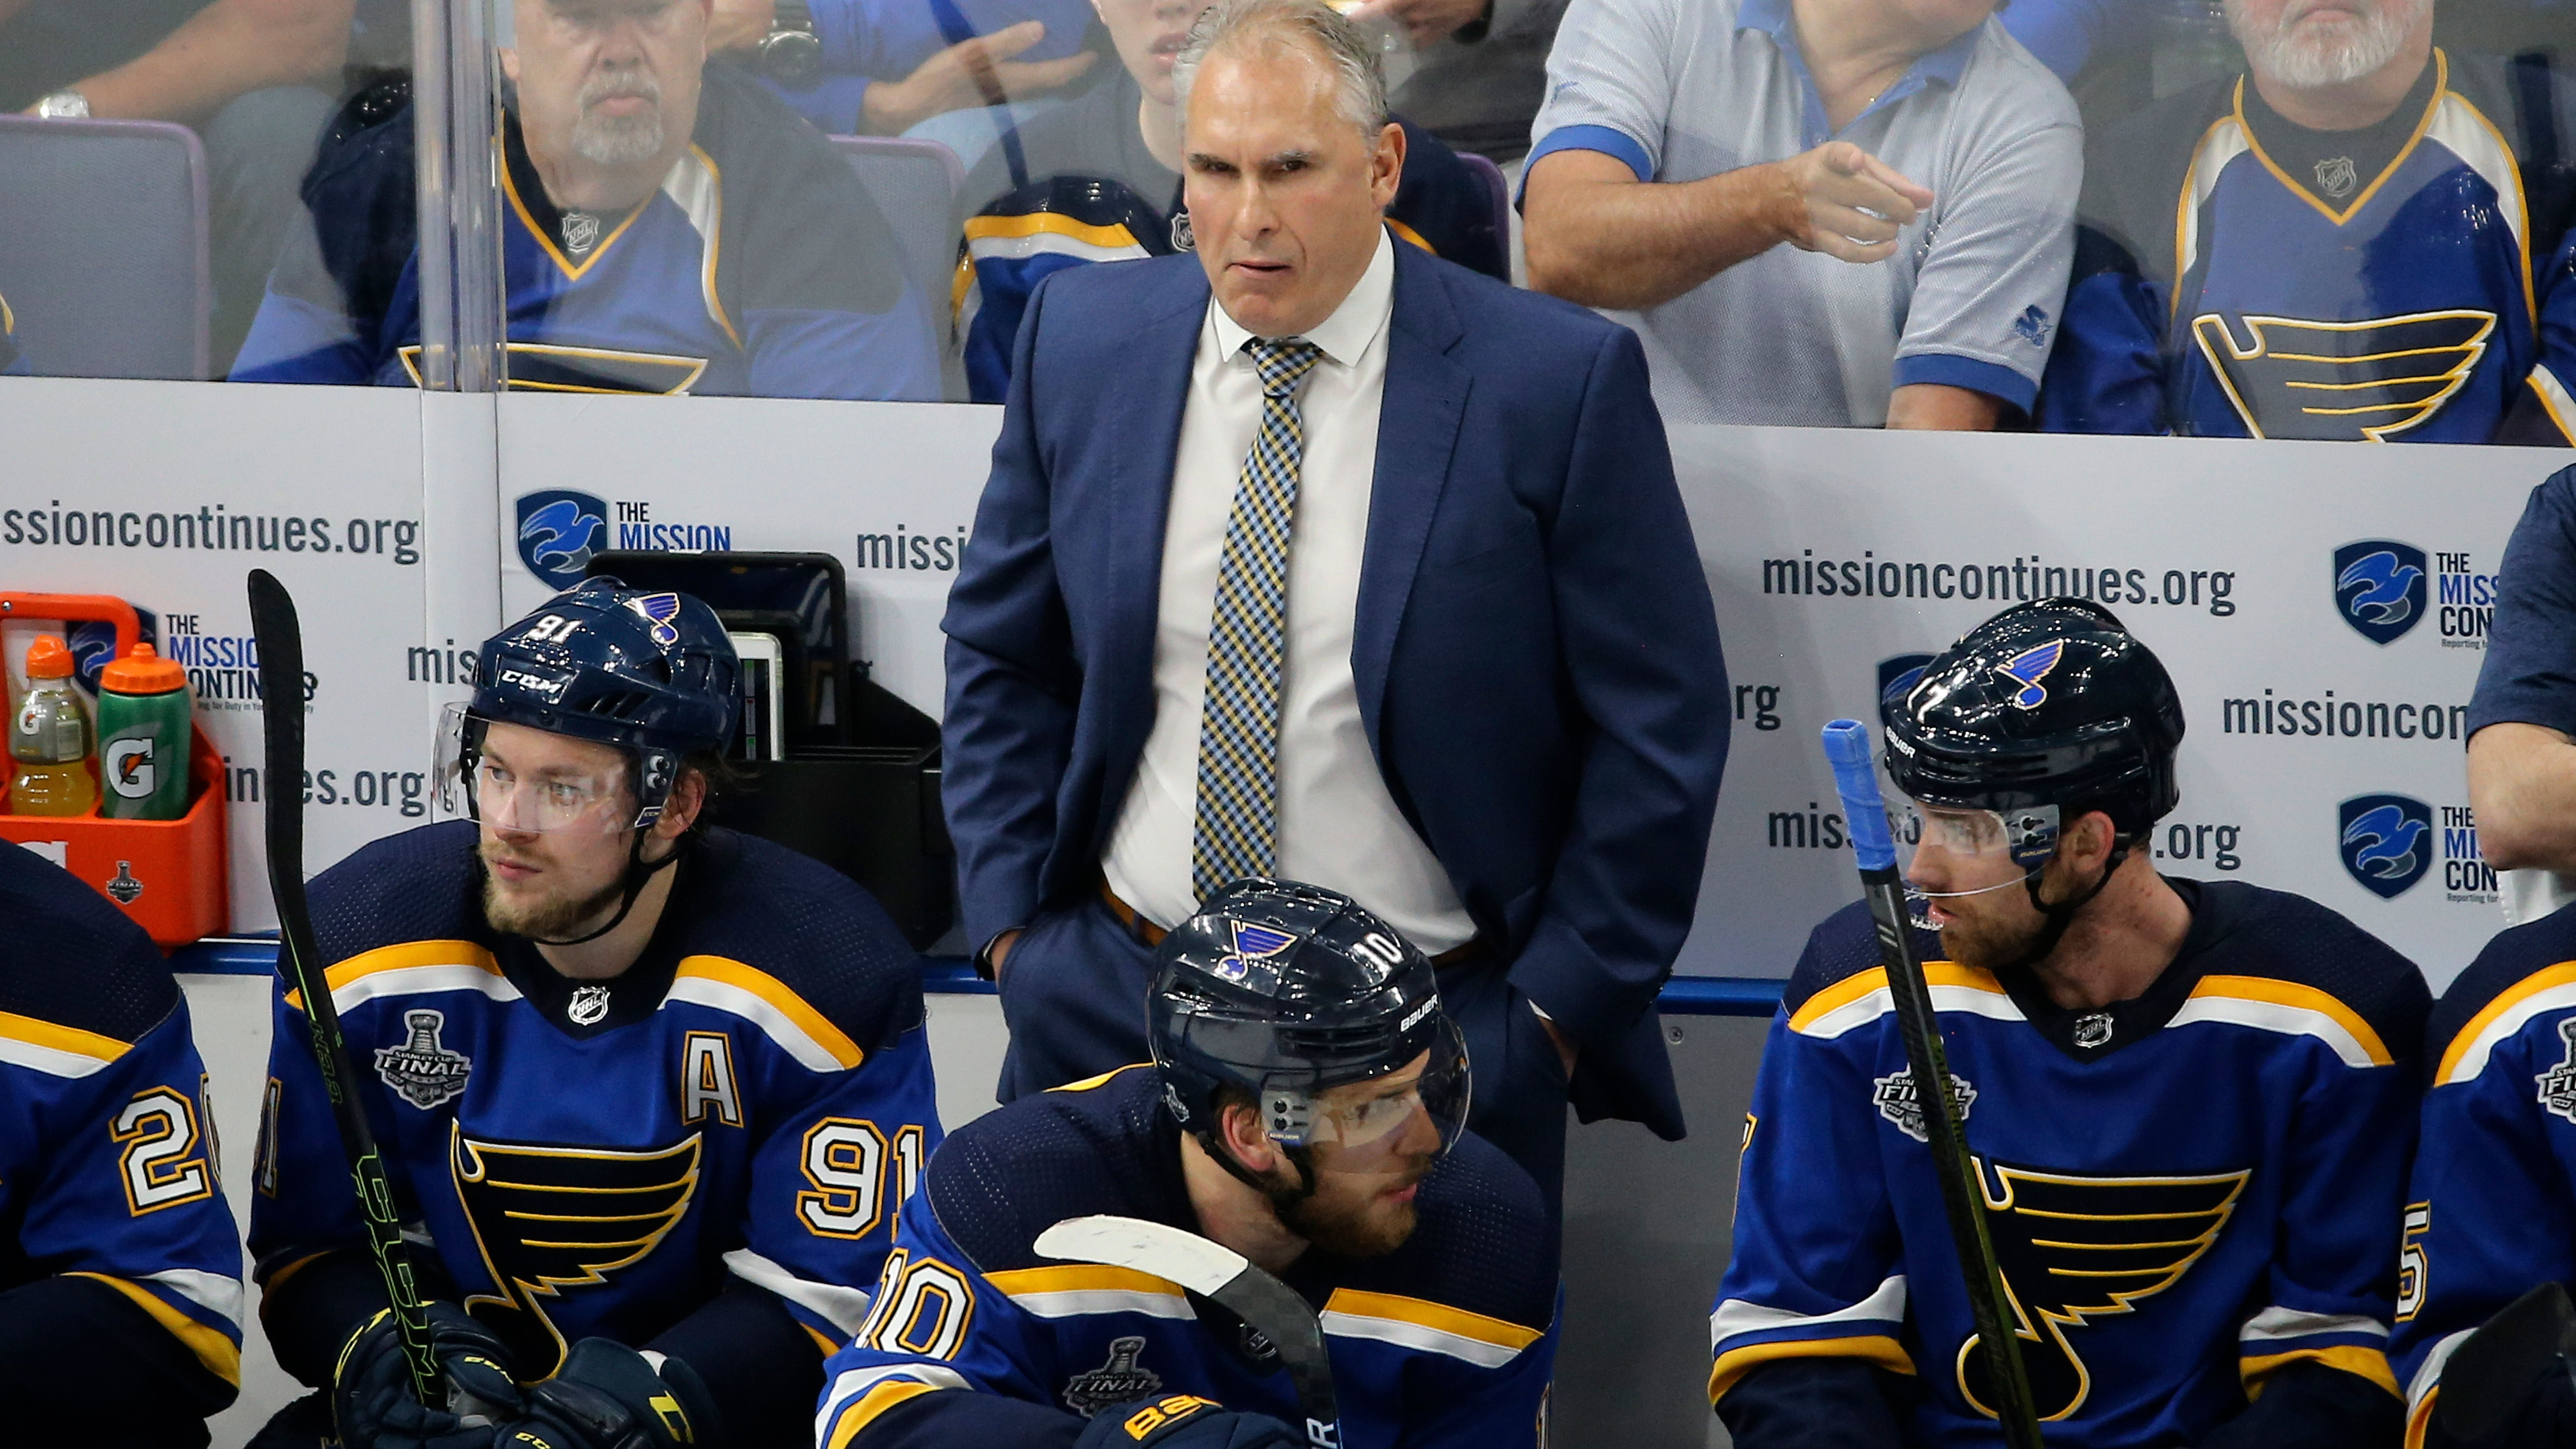 Blues suffer from lack of discipline, bad bounces in Game 6 loss